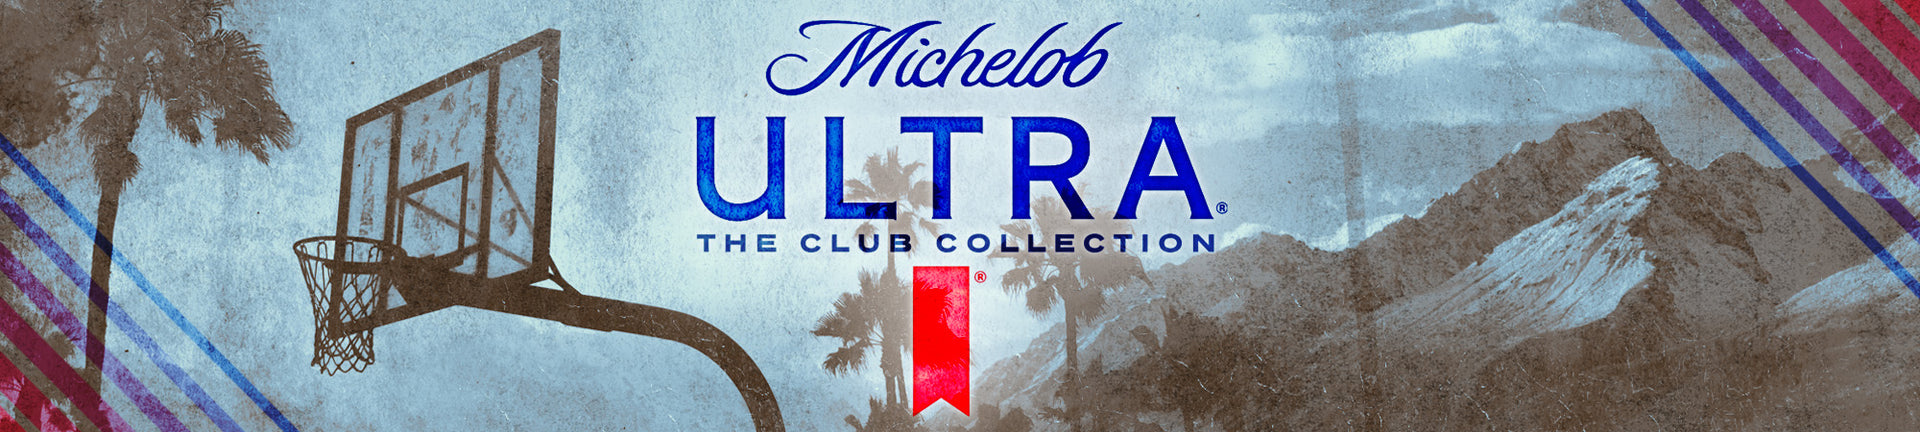 Michelob Ultra Club Collection Shirts & Apparel